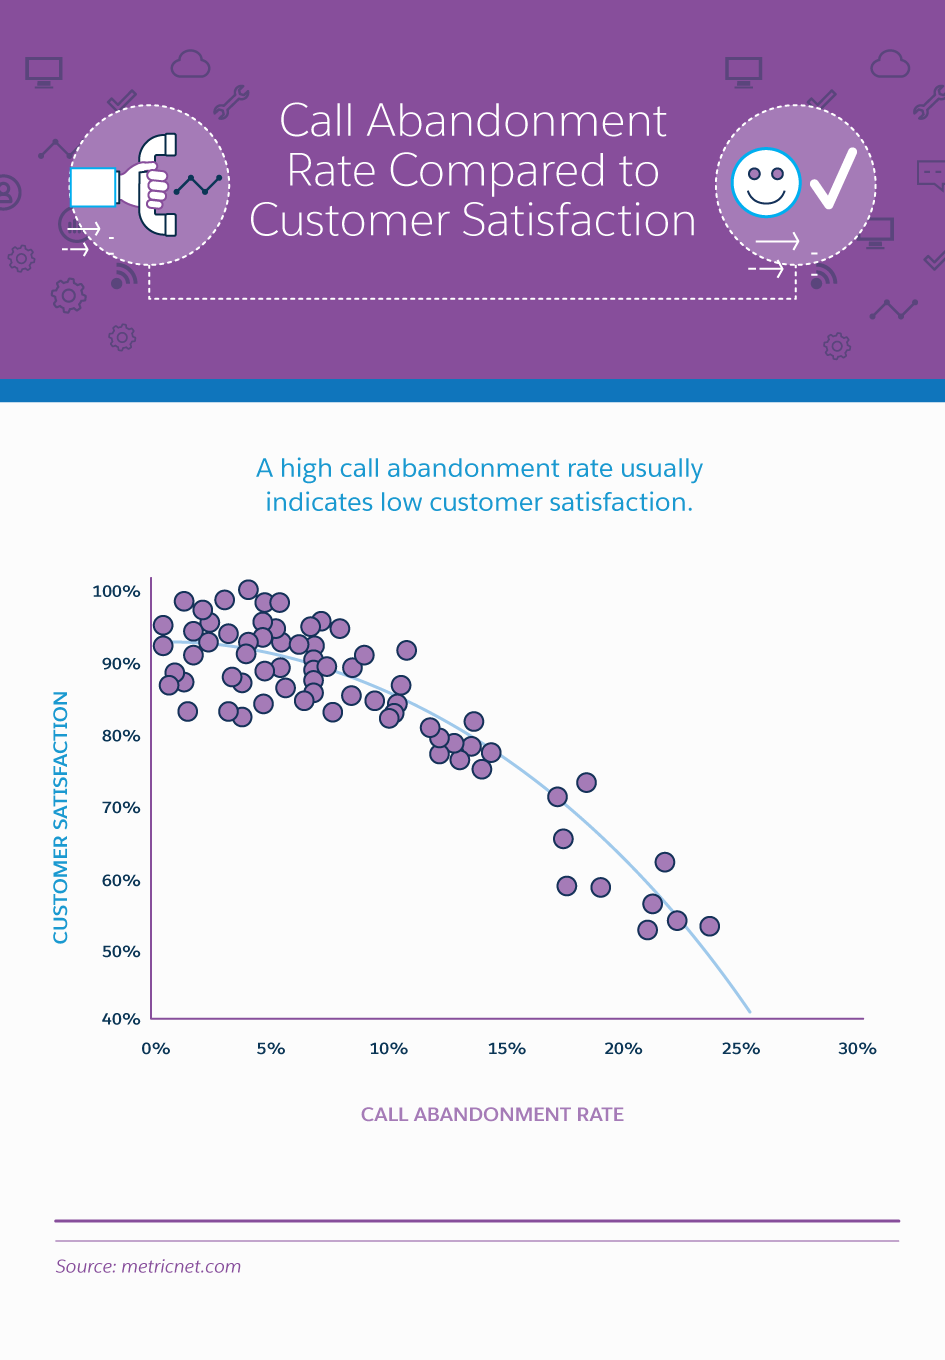 Call Abandonment Rate Compared to Customer Satisfaction